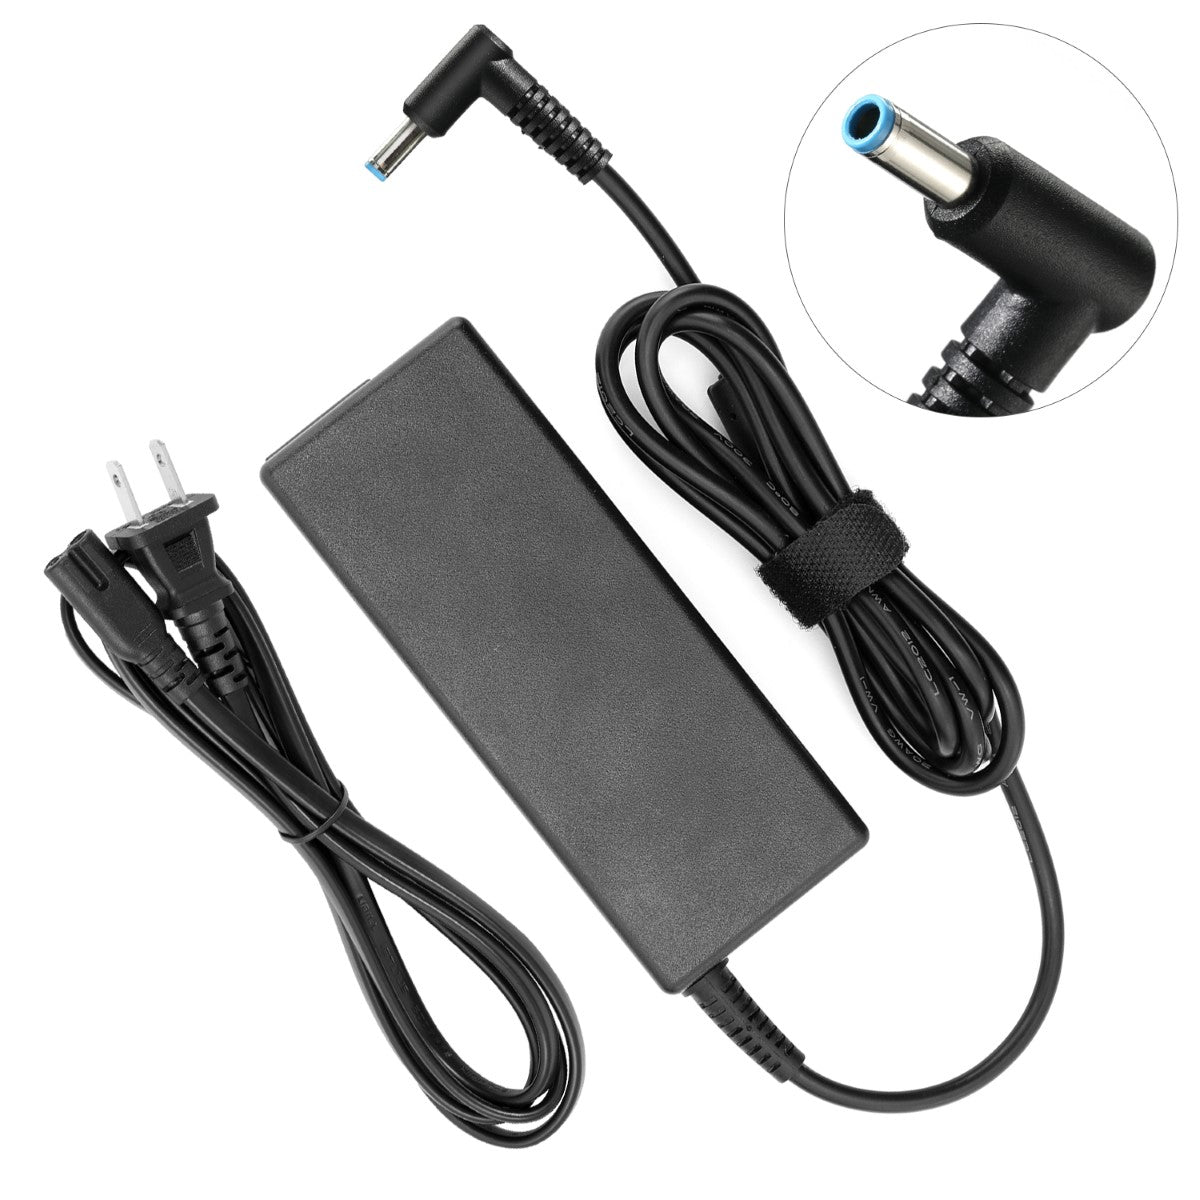 AC Adapter Charger for HP Envy TouchSmart 15-j050us Notebook.